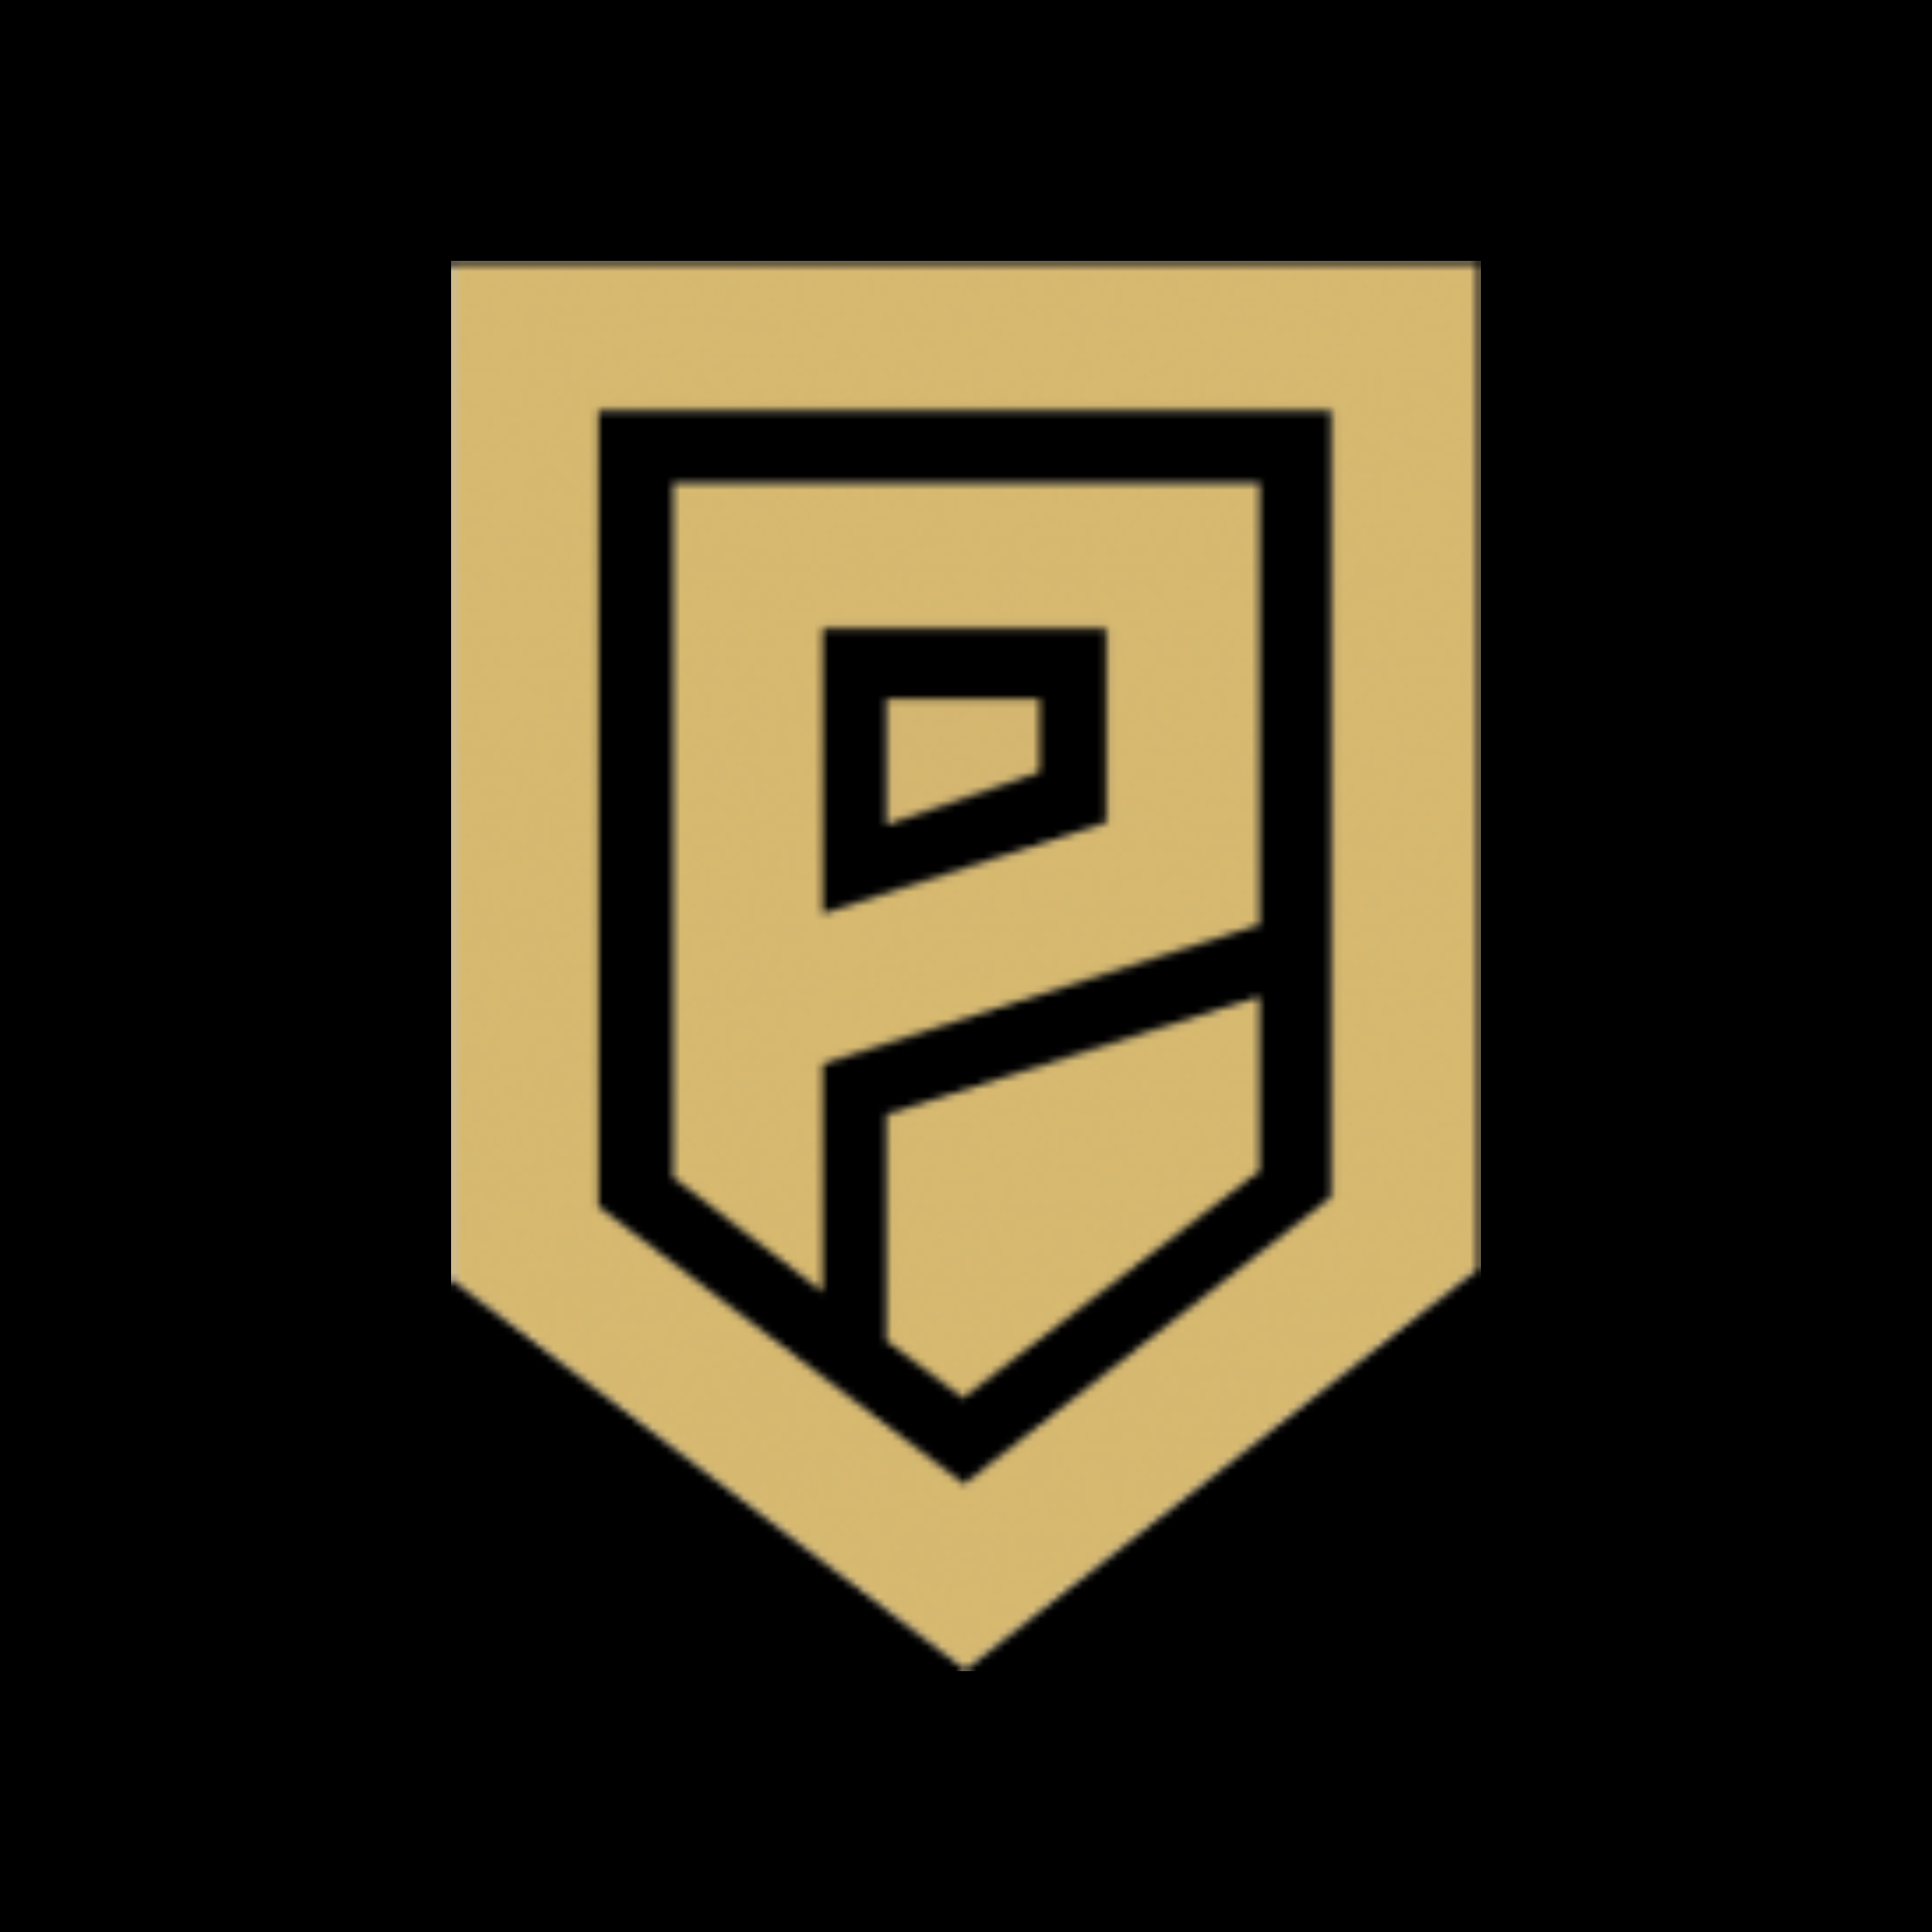 The official logo of Prolific Sports Club